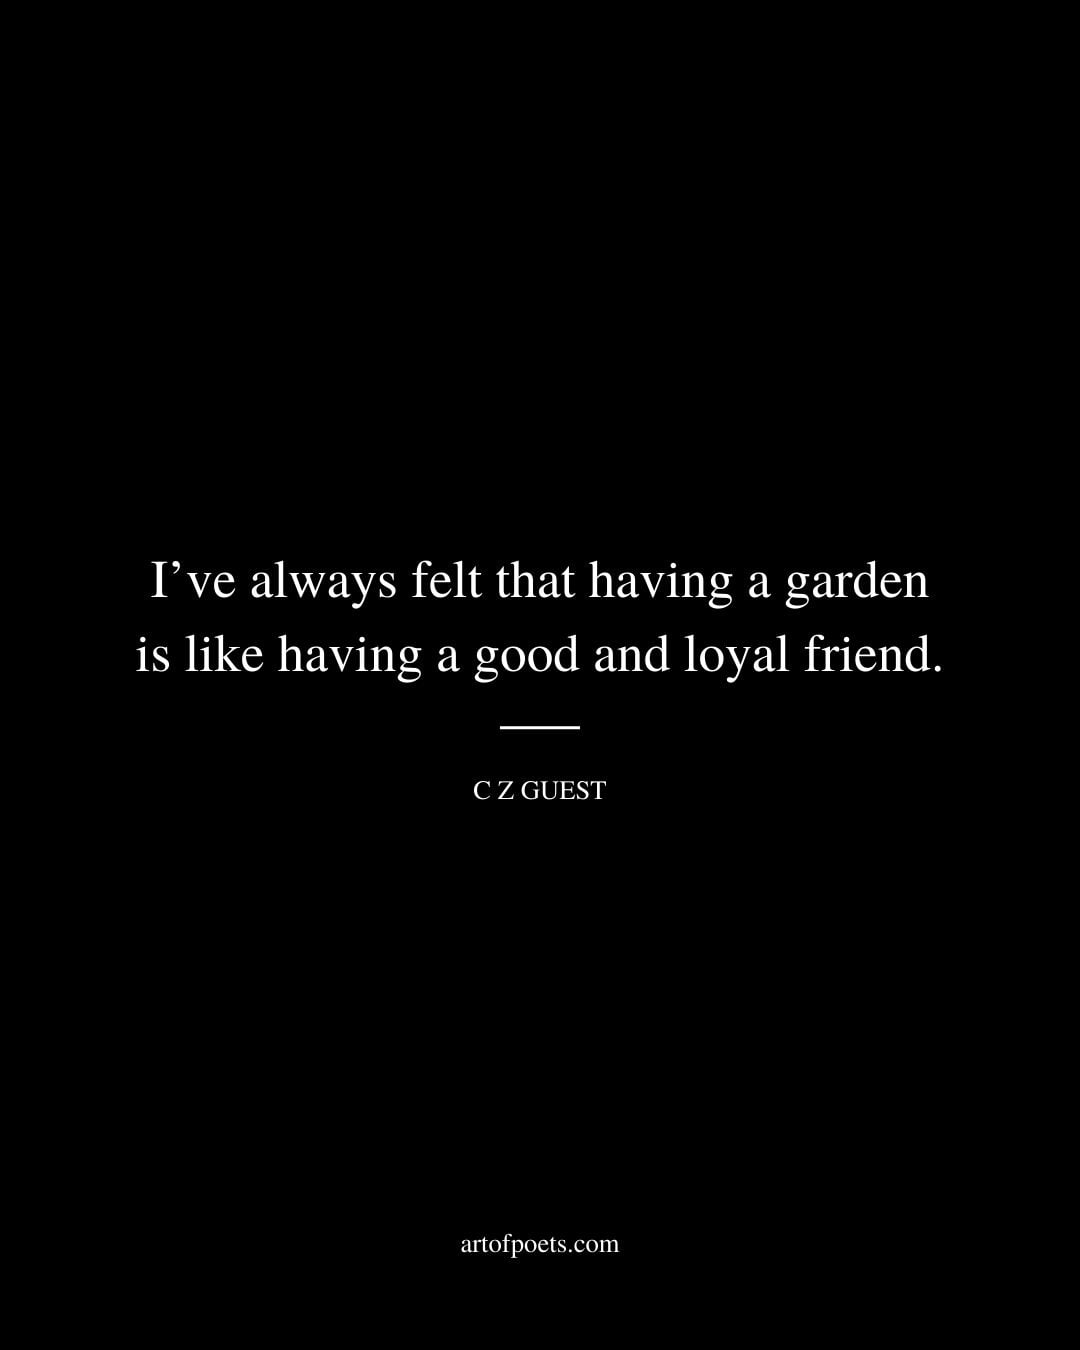 Ive always felt that having a garden is like having a good and loyal friend. C Z Guest